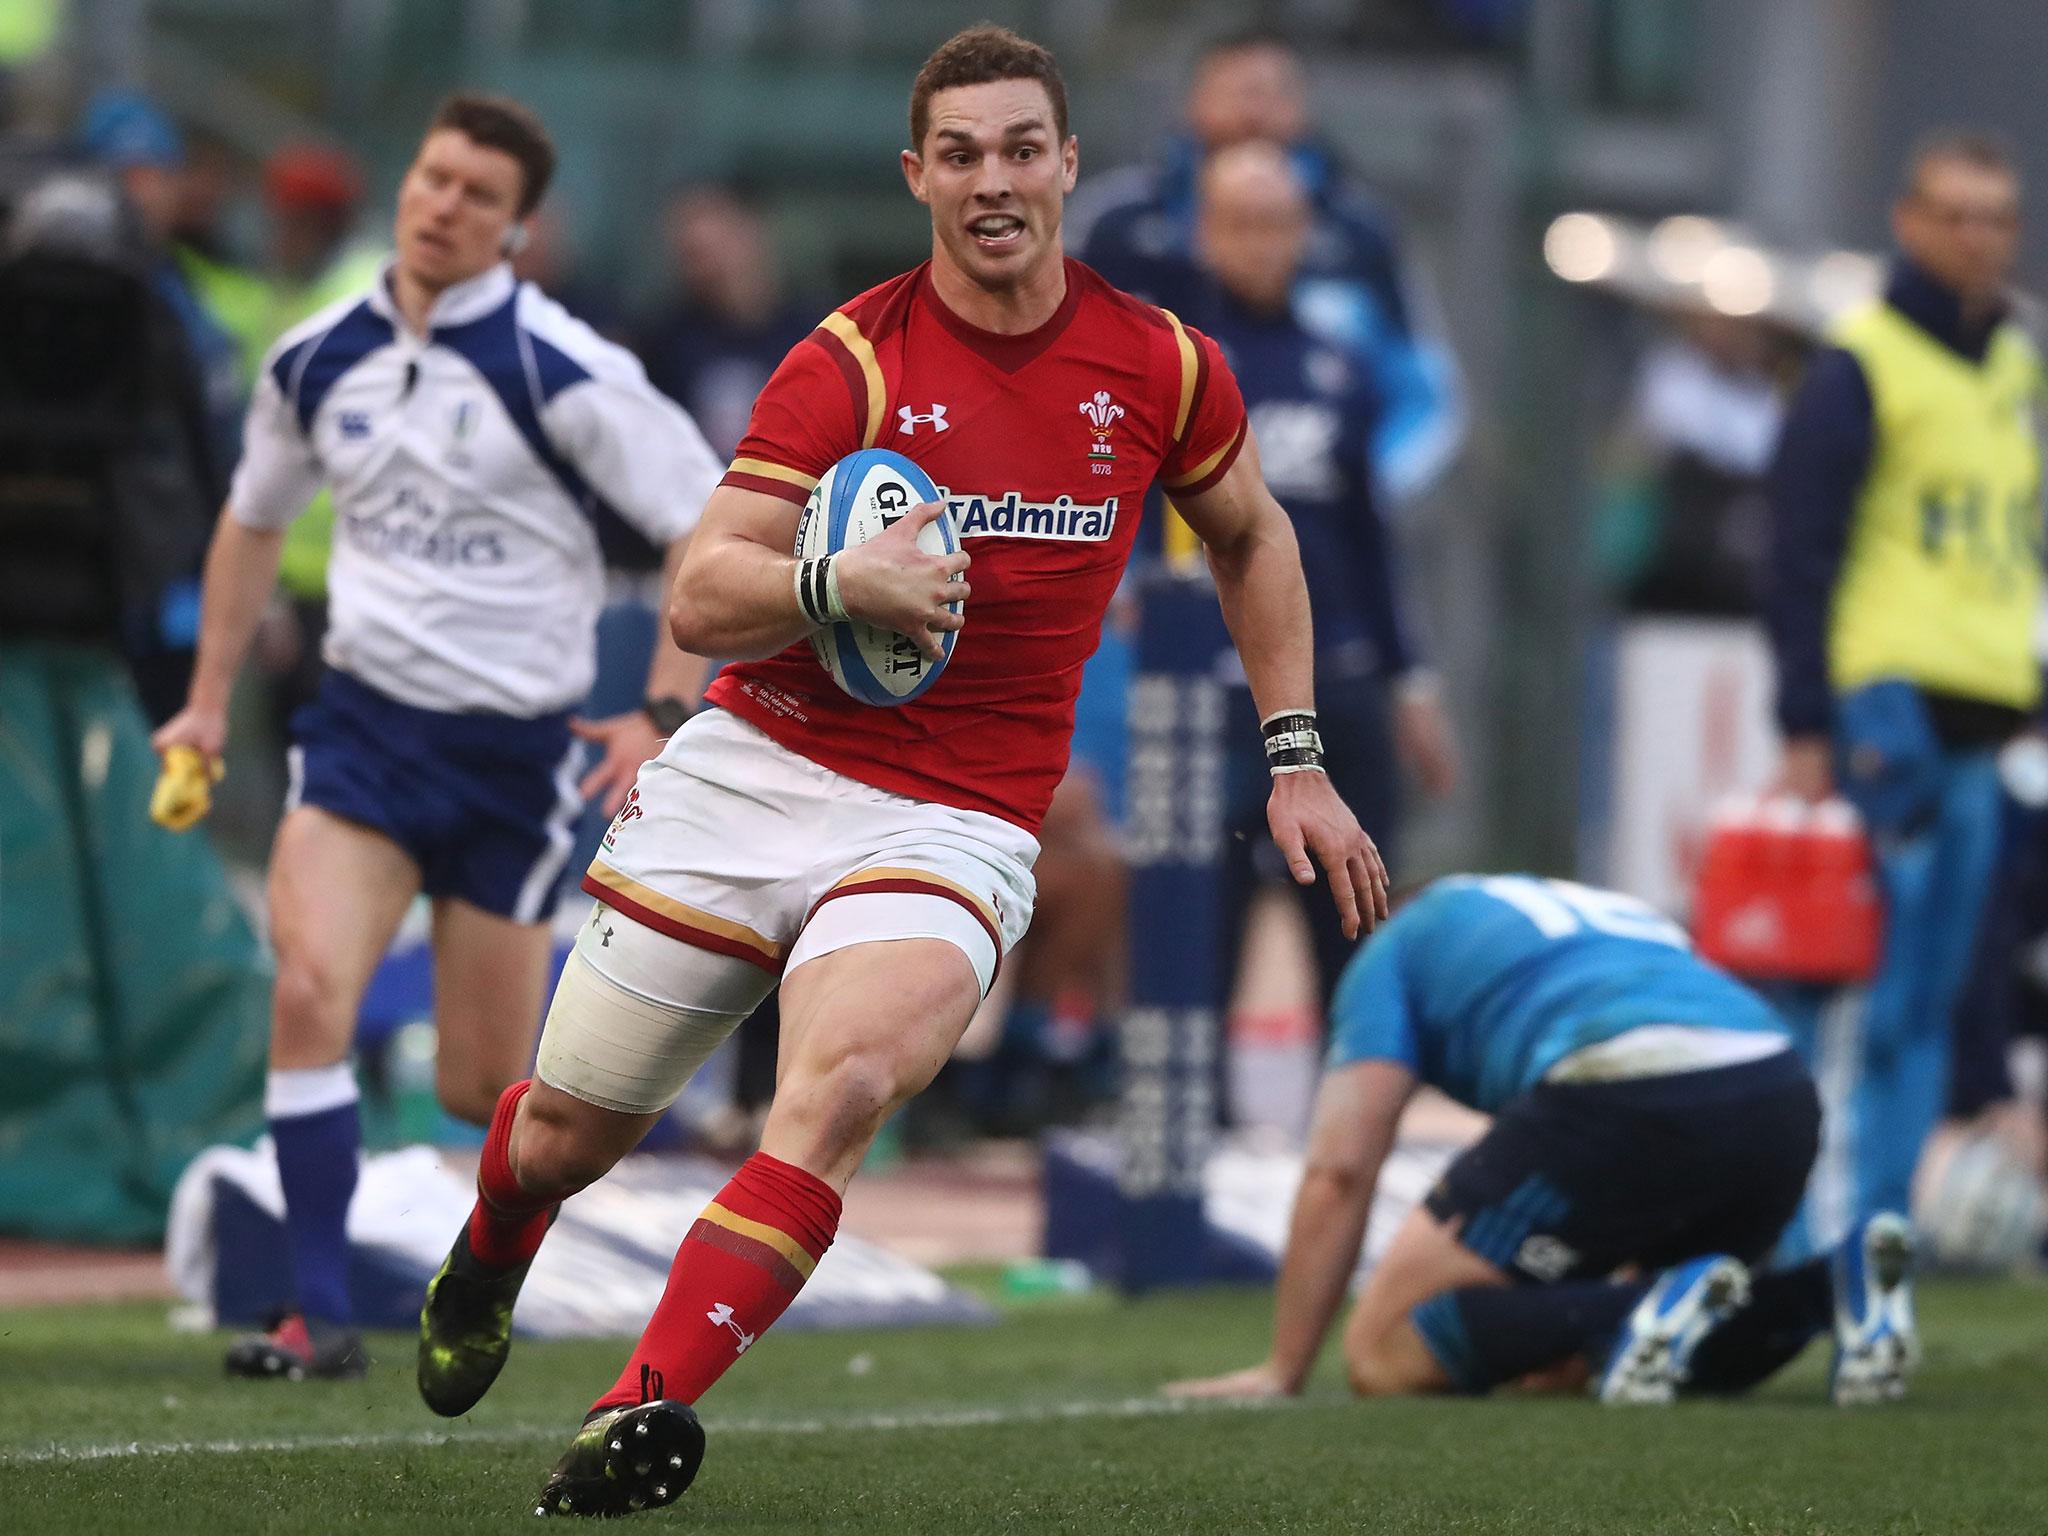 George North looks set to miss Wales's Six Nations clash with England